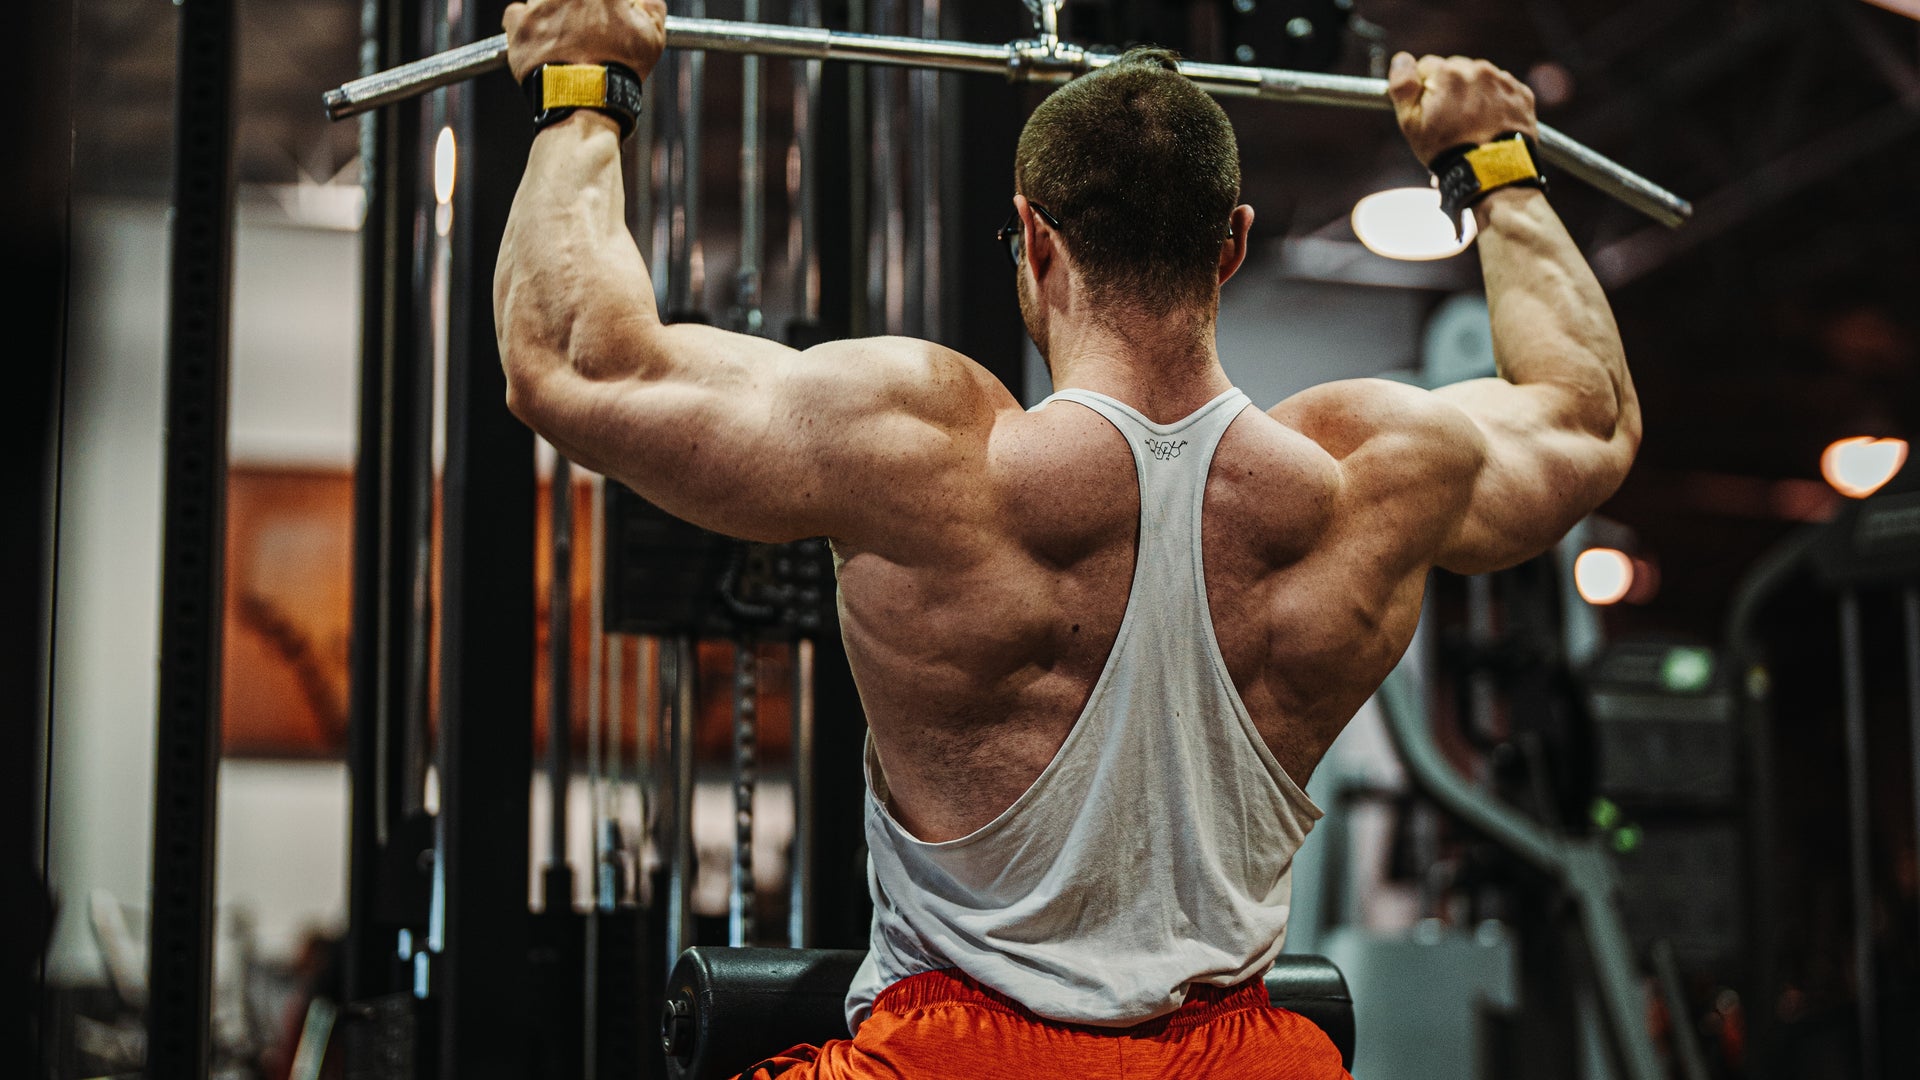 Drop Sets: How To, Benefits, Muscle Groups & Examples - SET FOR SET